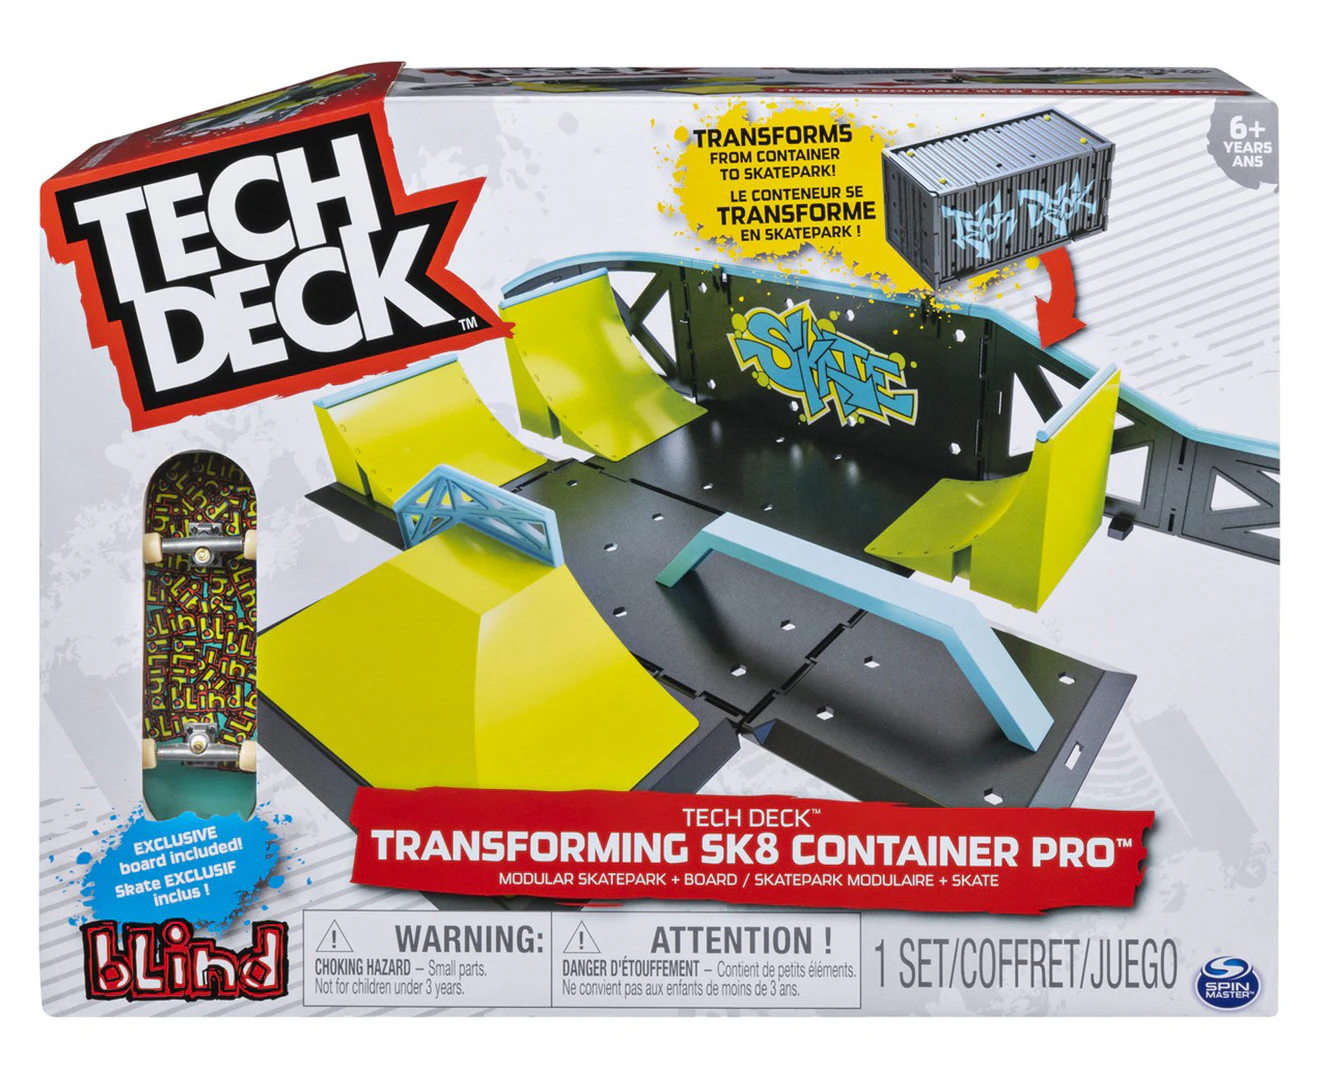  TECH DECK, Zero Pro Series Finger Board with Storage Display,  Built for Pros; Authentic Mini Skateboards, Kids Toys for Ages 6 and up :  Toys & Games